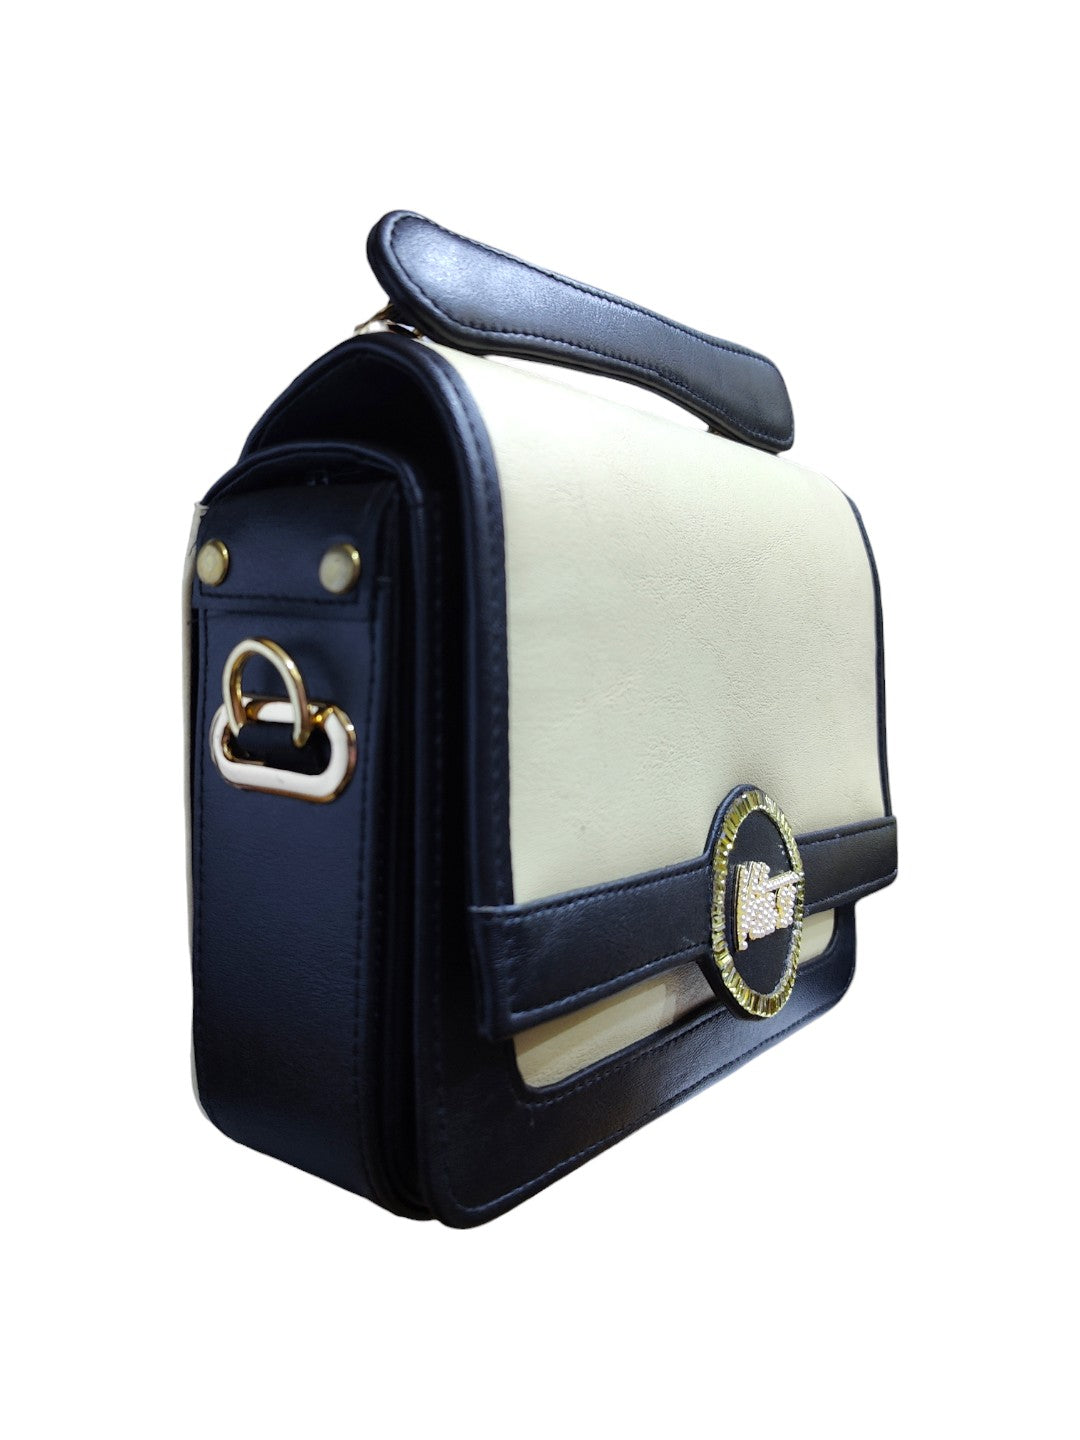 Designed to complement your busy lifestyle, this chic accessory features a sleek top handle and a secure flip closure.